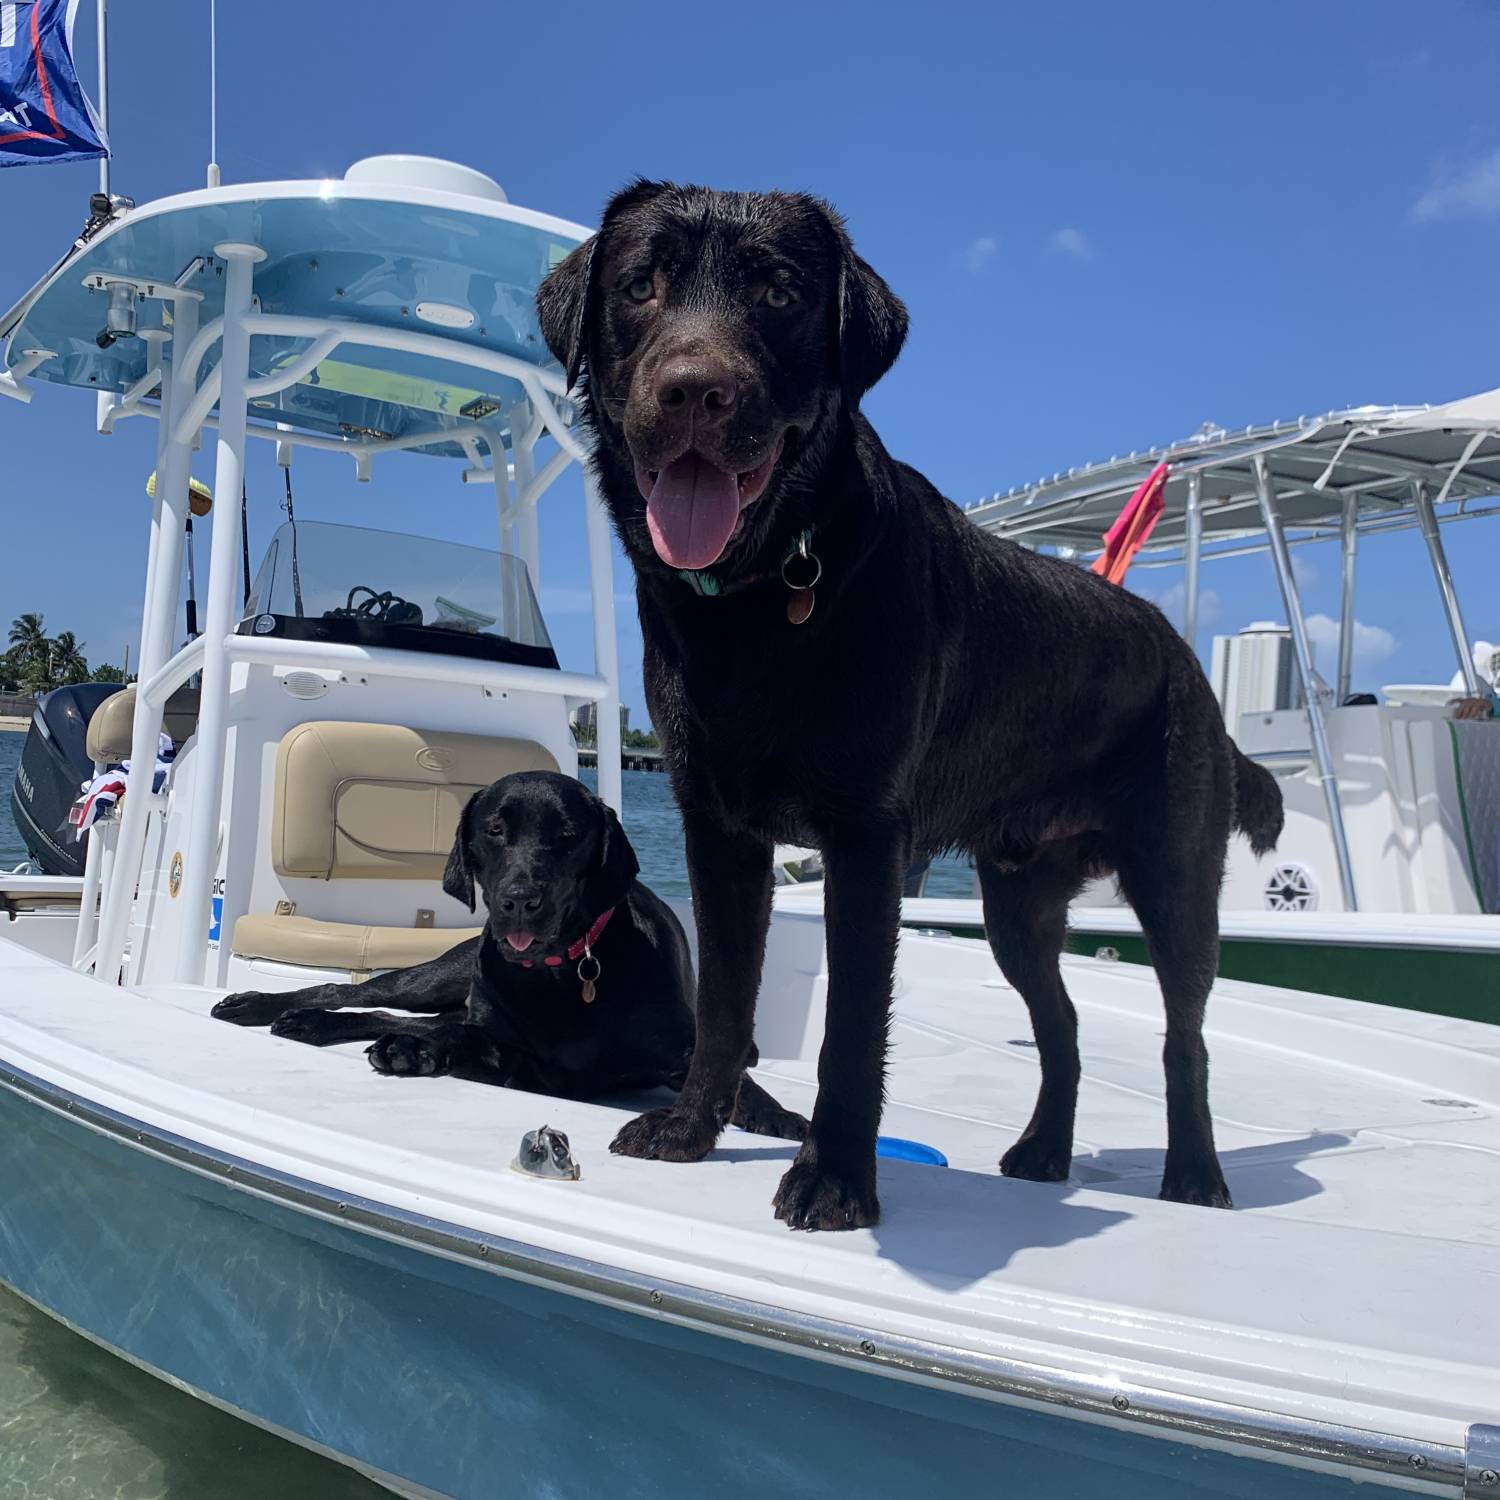 Our two labradors Kimber & Ruger love being on the boat :)